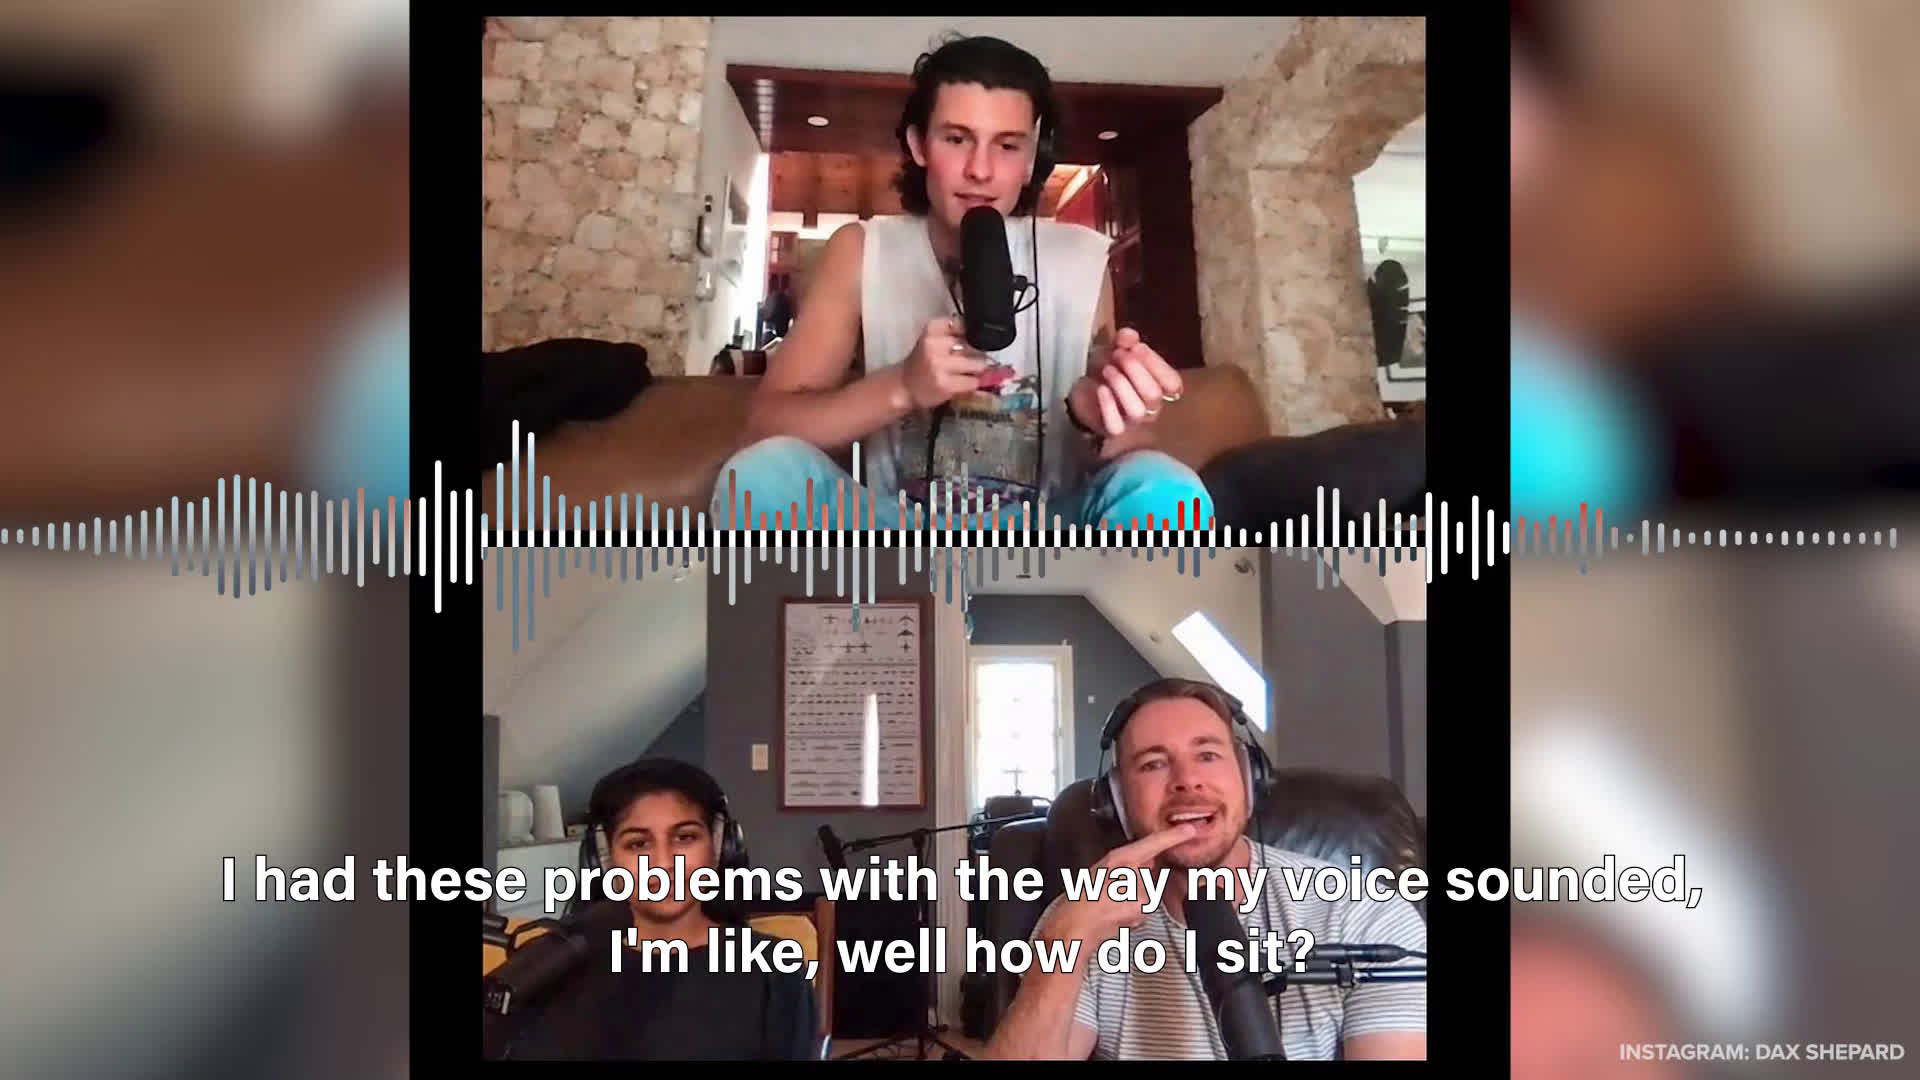 7 Wildest revelations from Shawn Mendes' interview with Dax Shepard